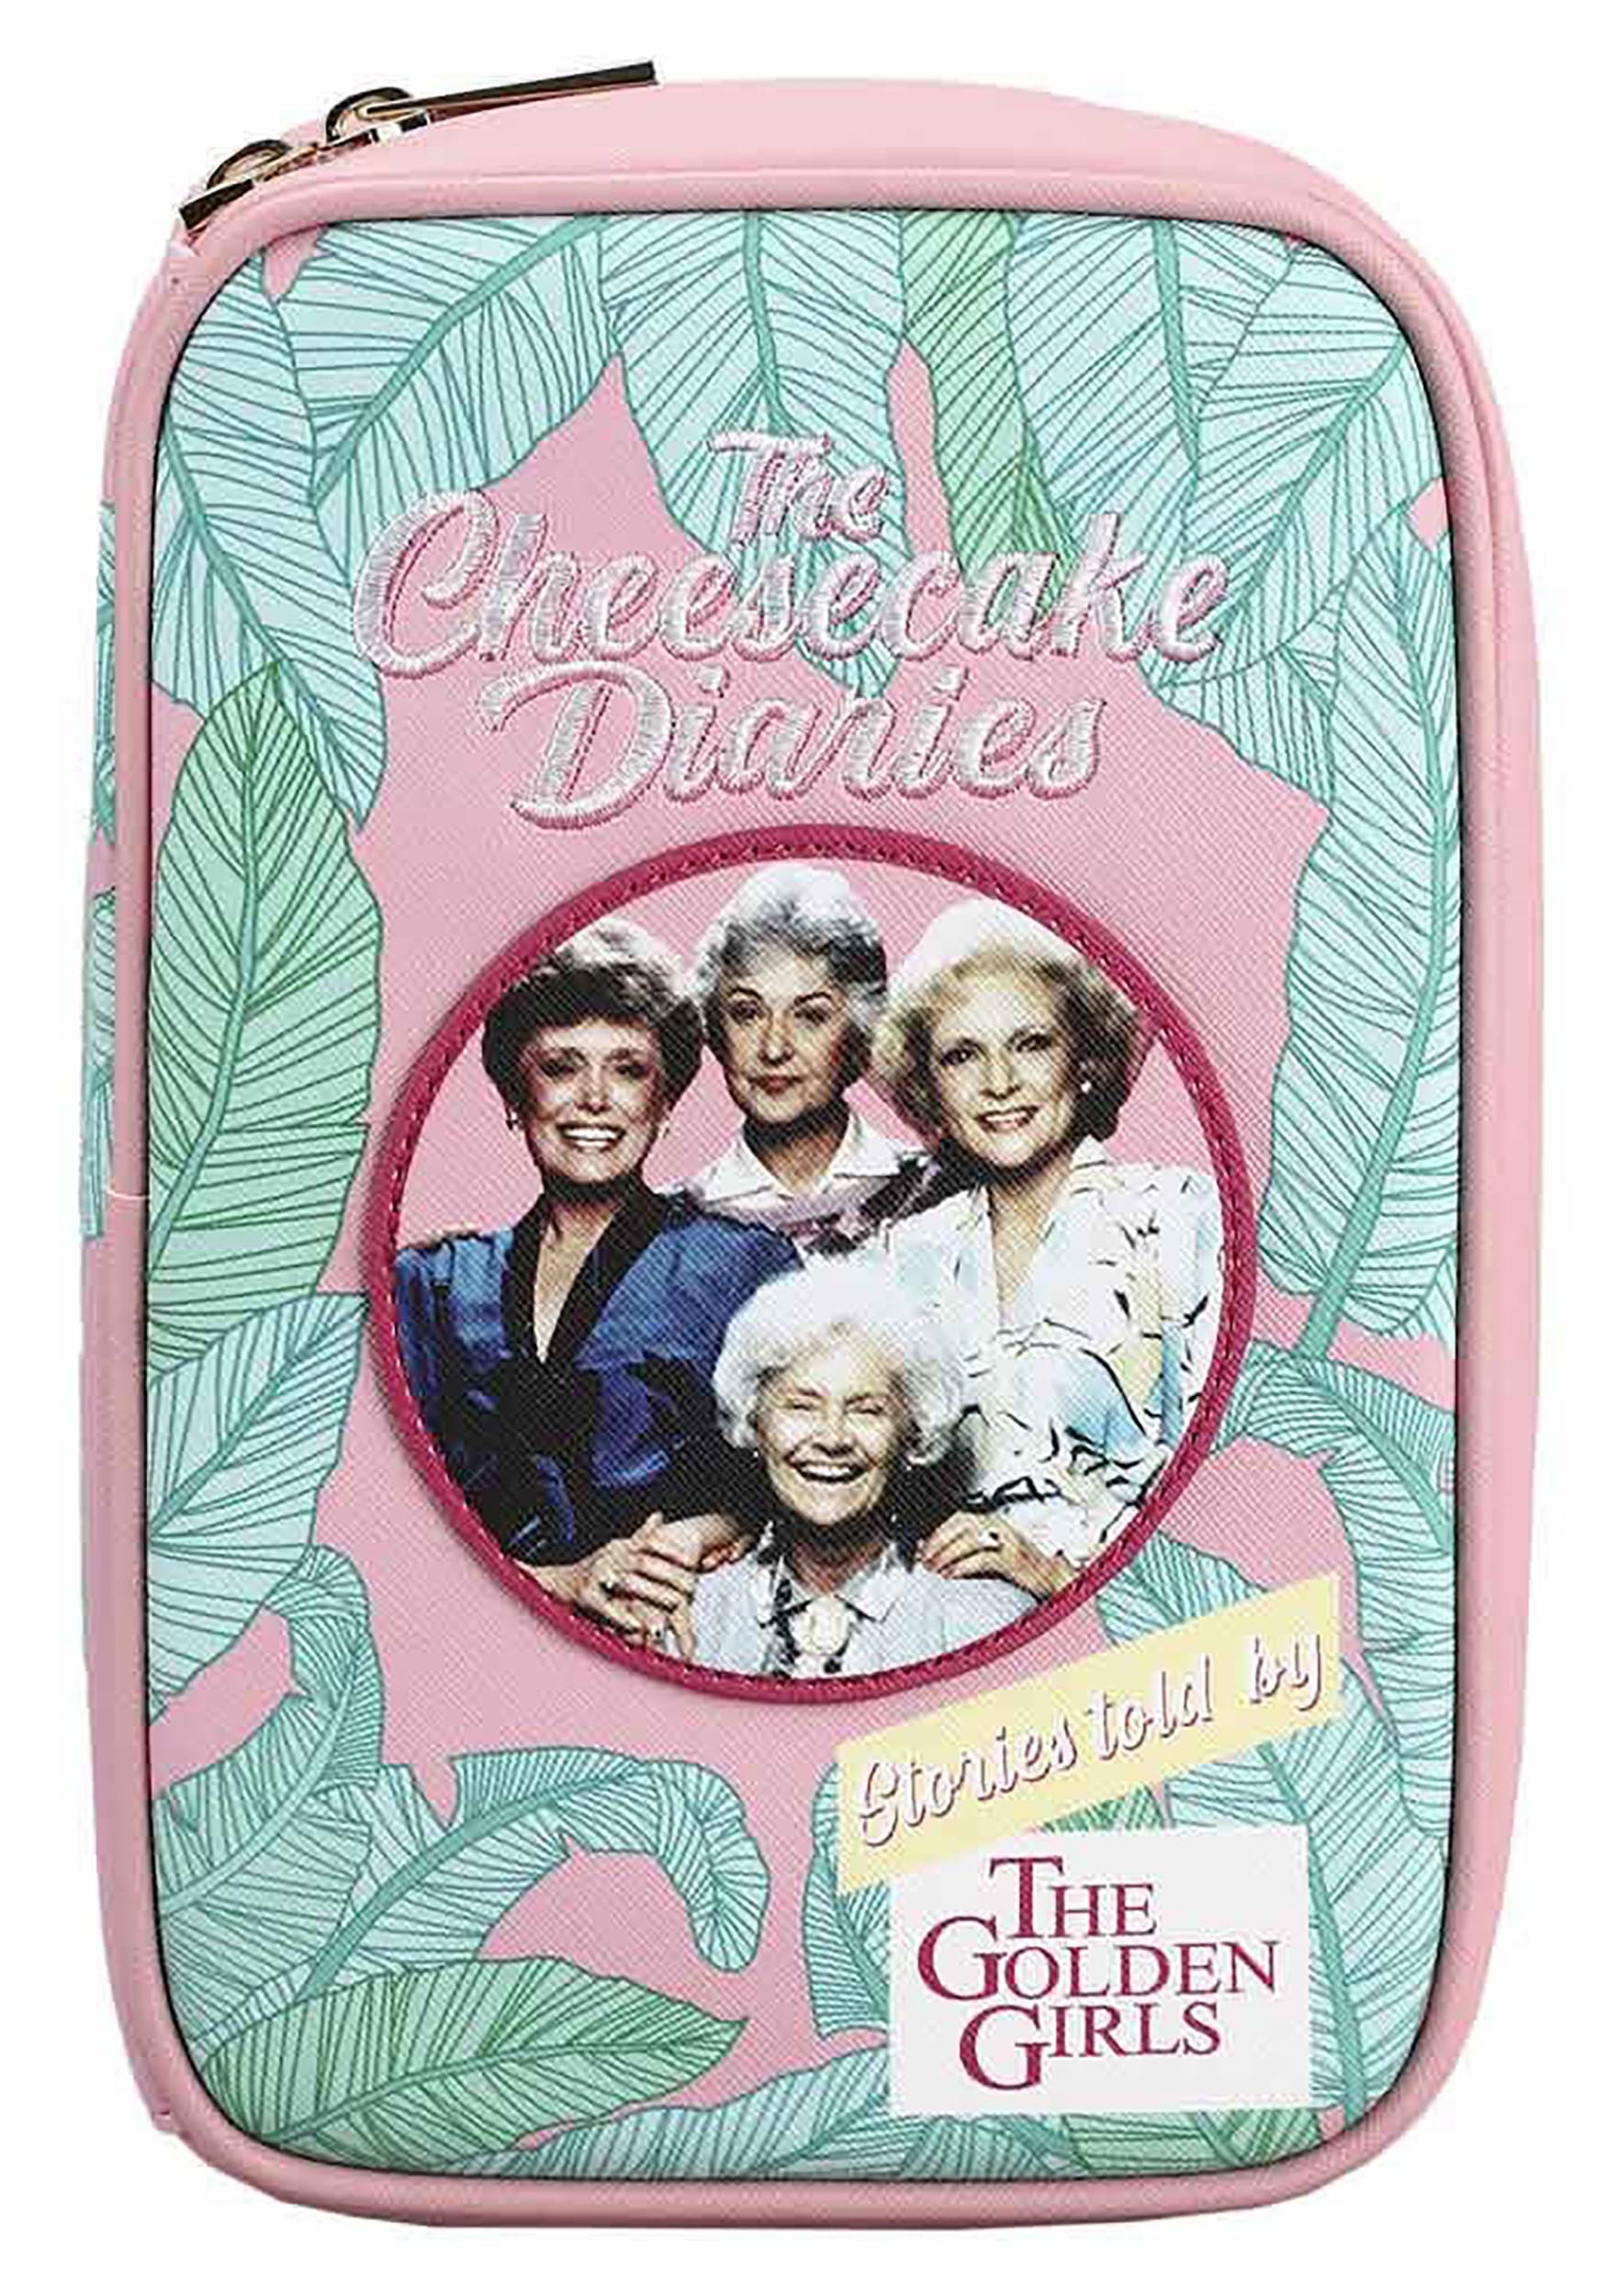 https://images.fun.com/products/82512/1-1/the-golden-girls-the-cheesecake-diaries-travel-cosmetic-bag.jpg